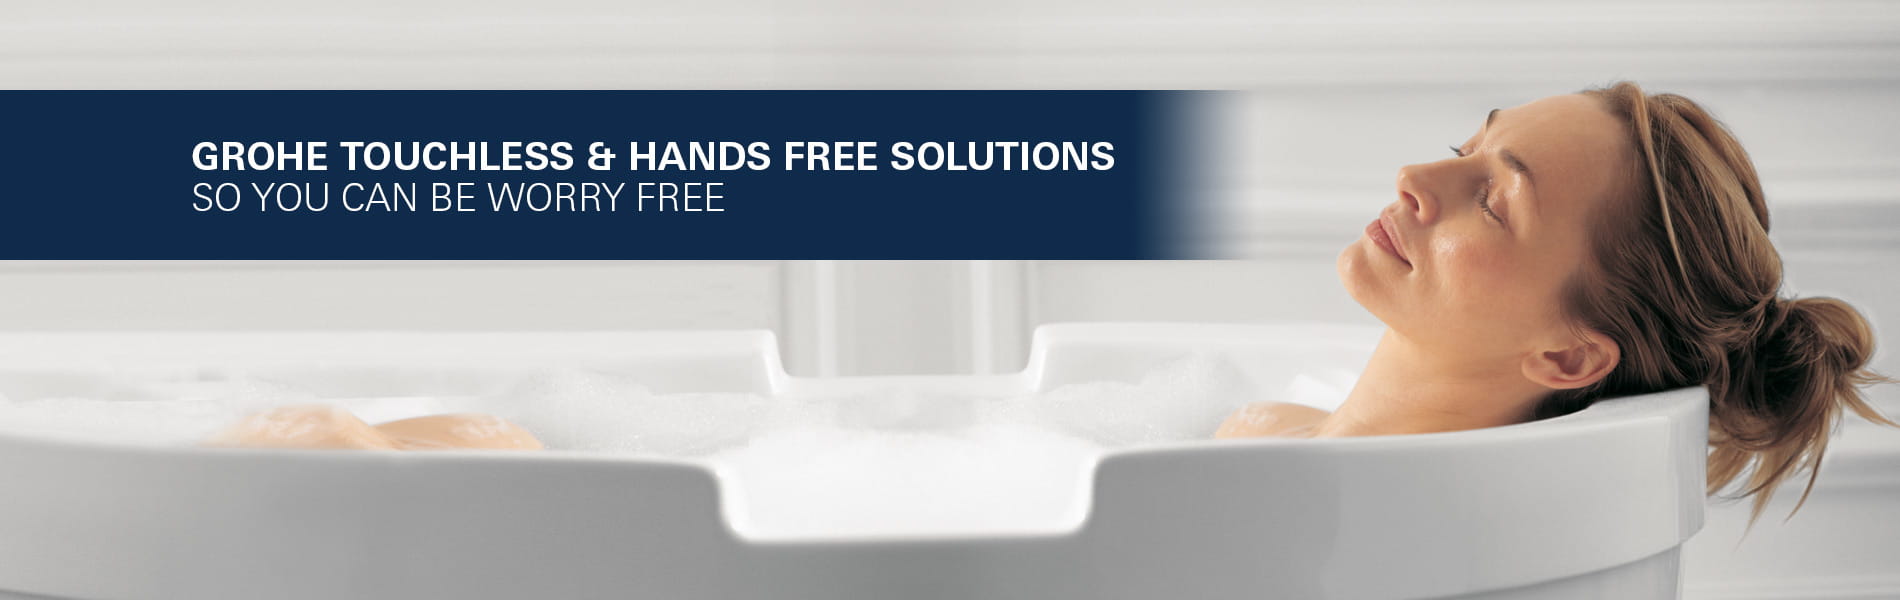 GROHE Touchless & Hands Free Solutions So You Can Be Worry Free